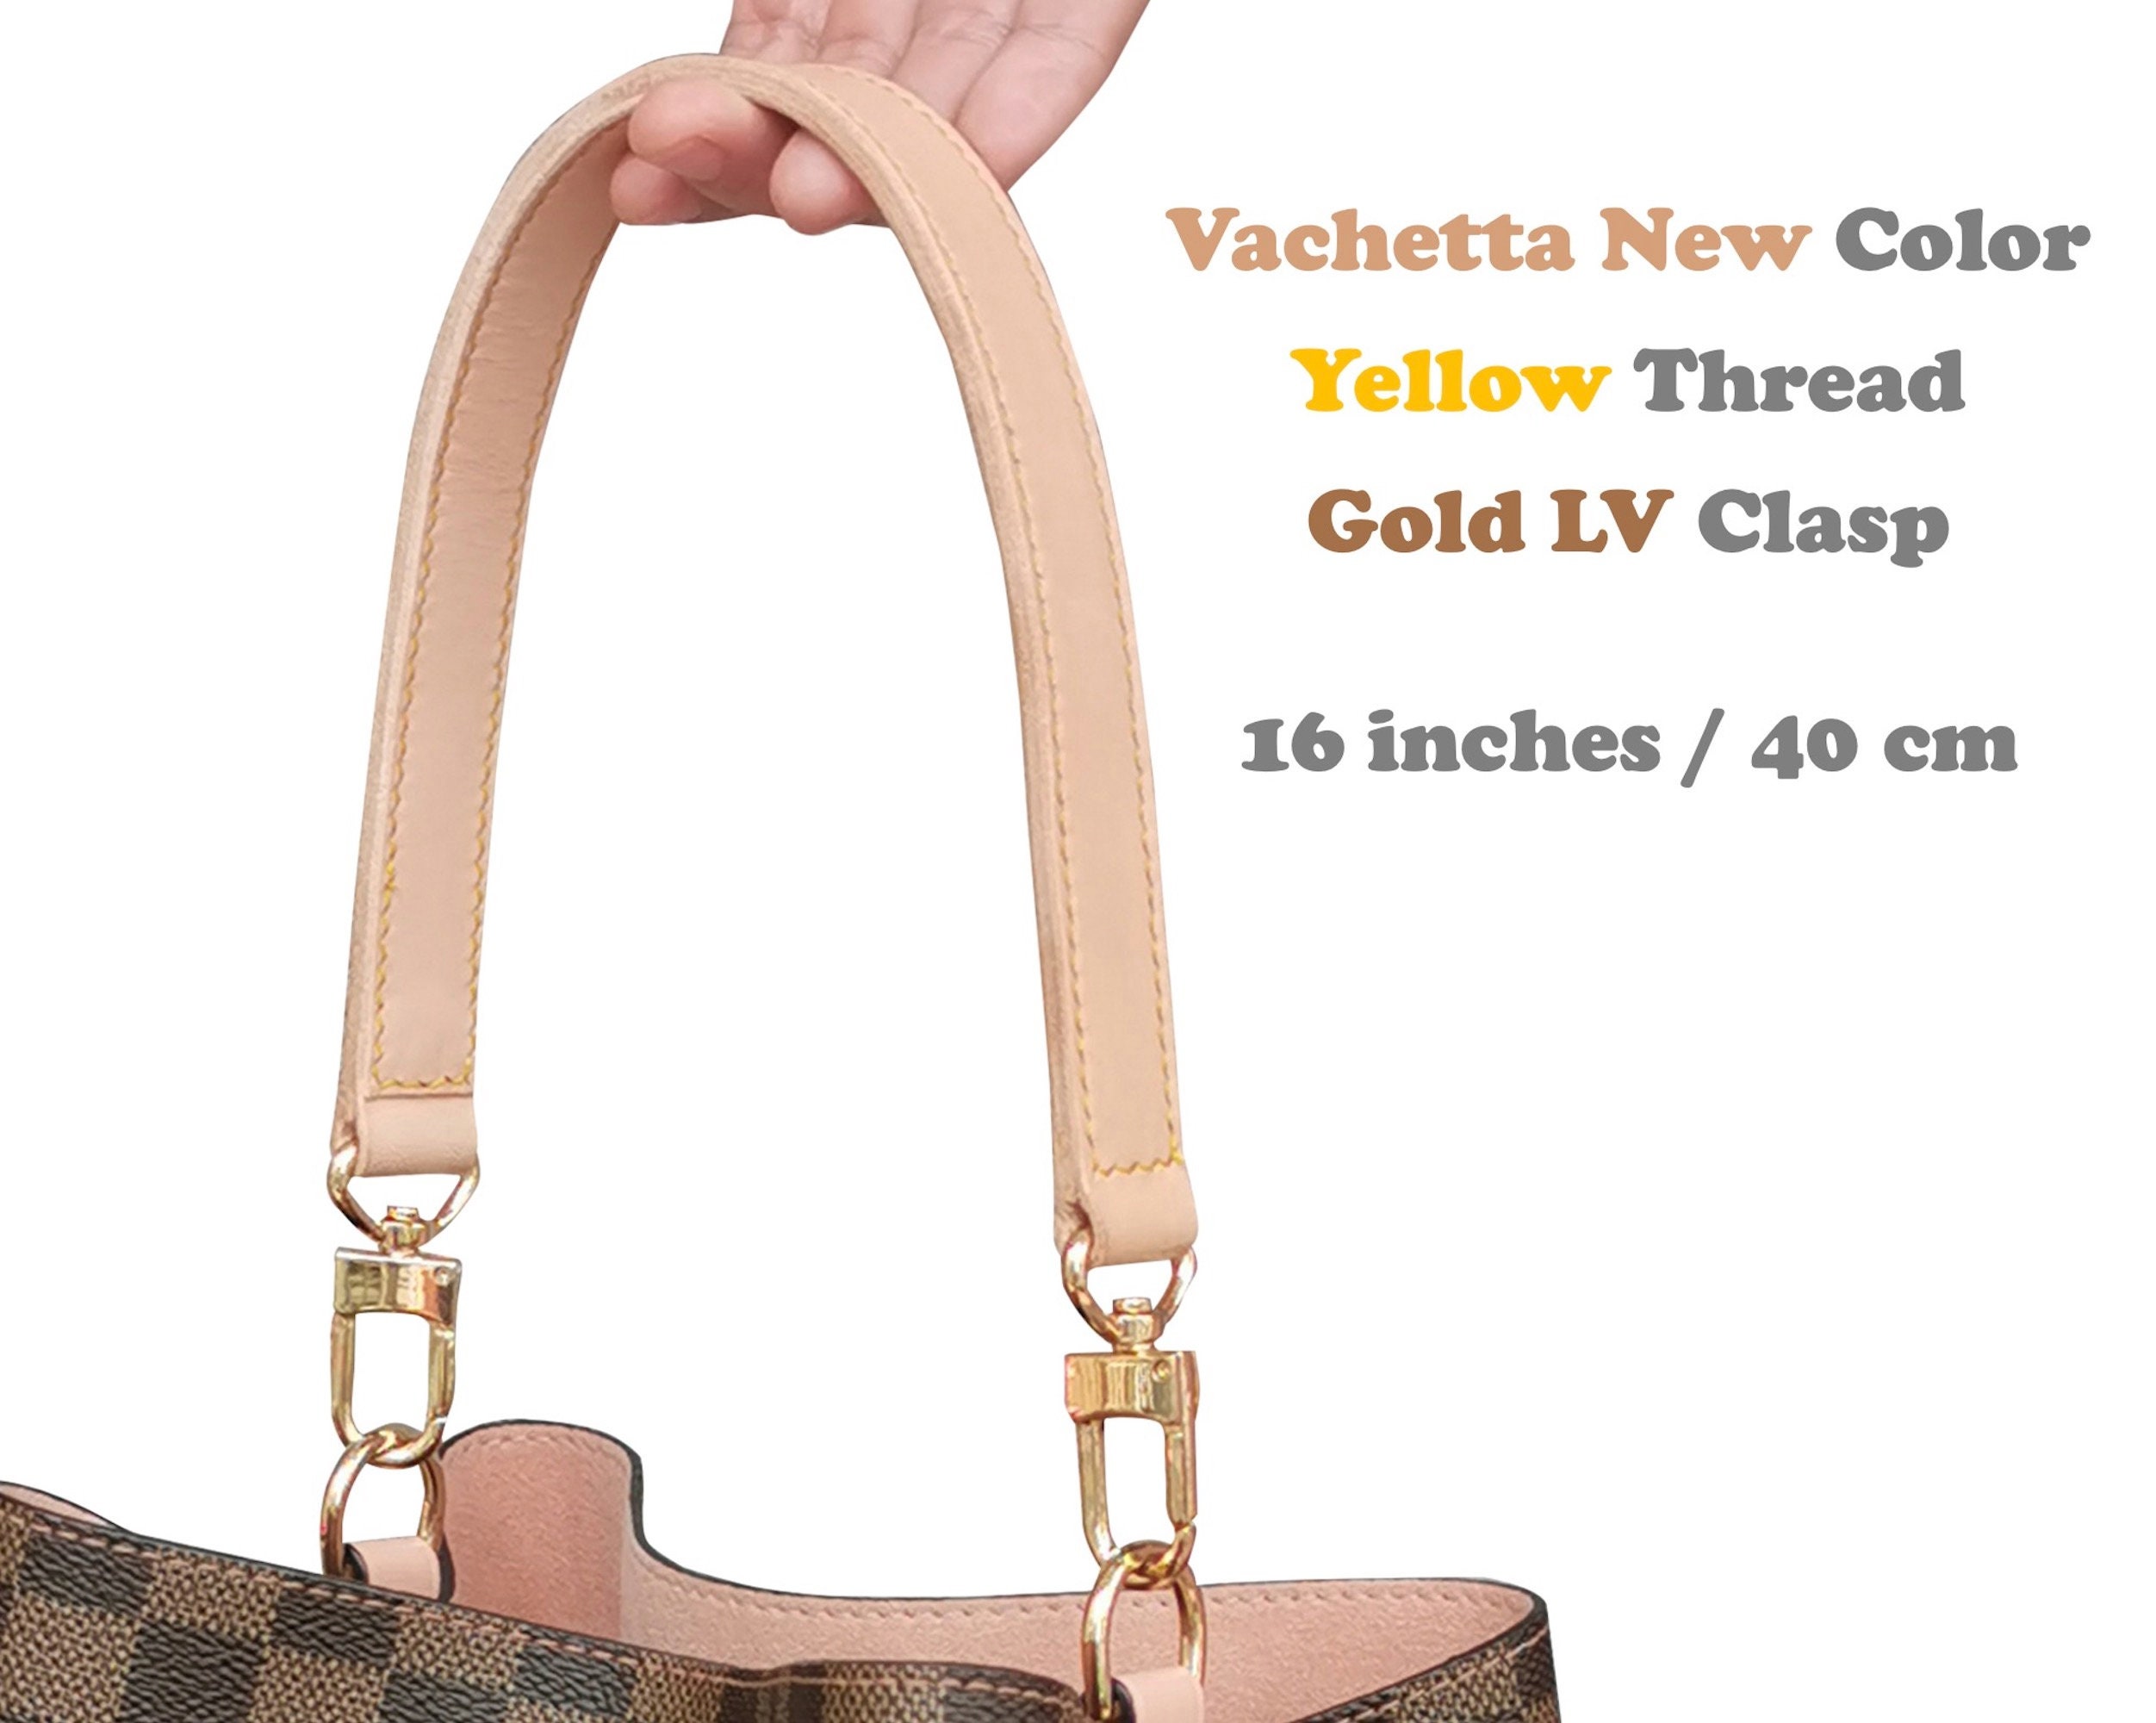 Vachetta Leather Replacement Crossbody Bag Strap,Fit for LV Speedy